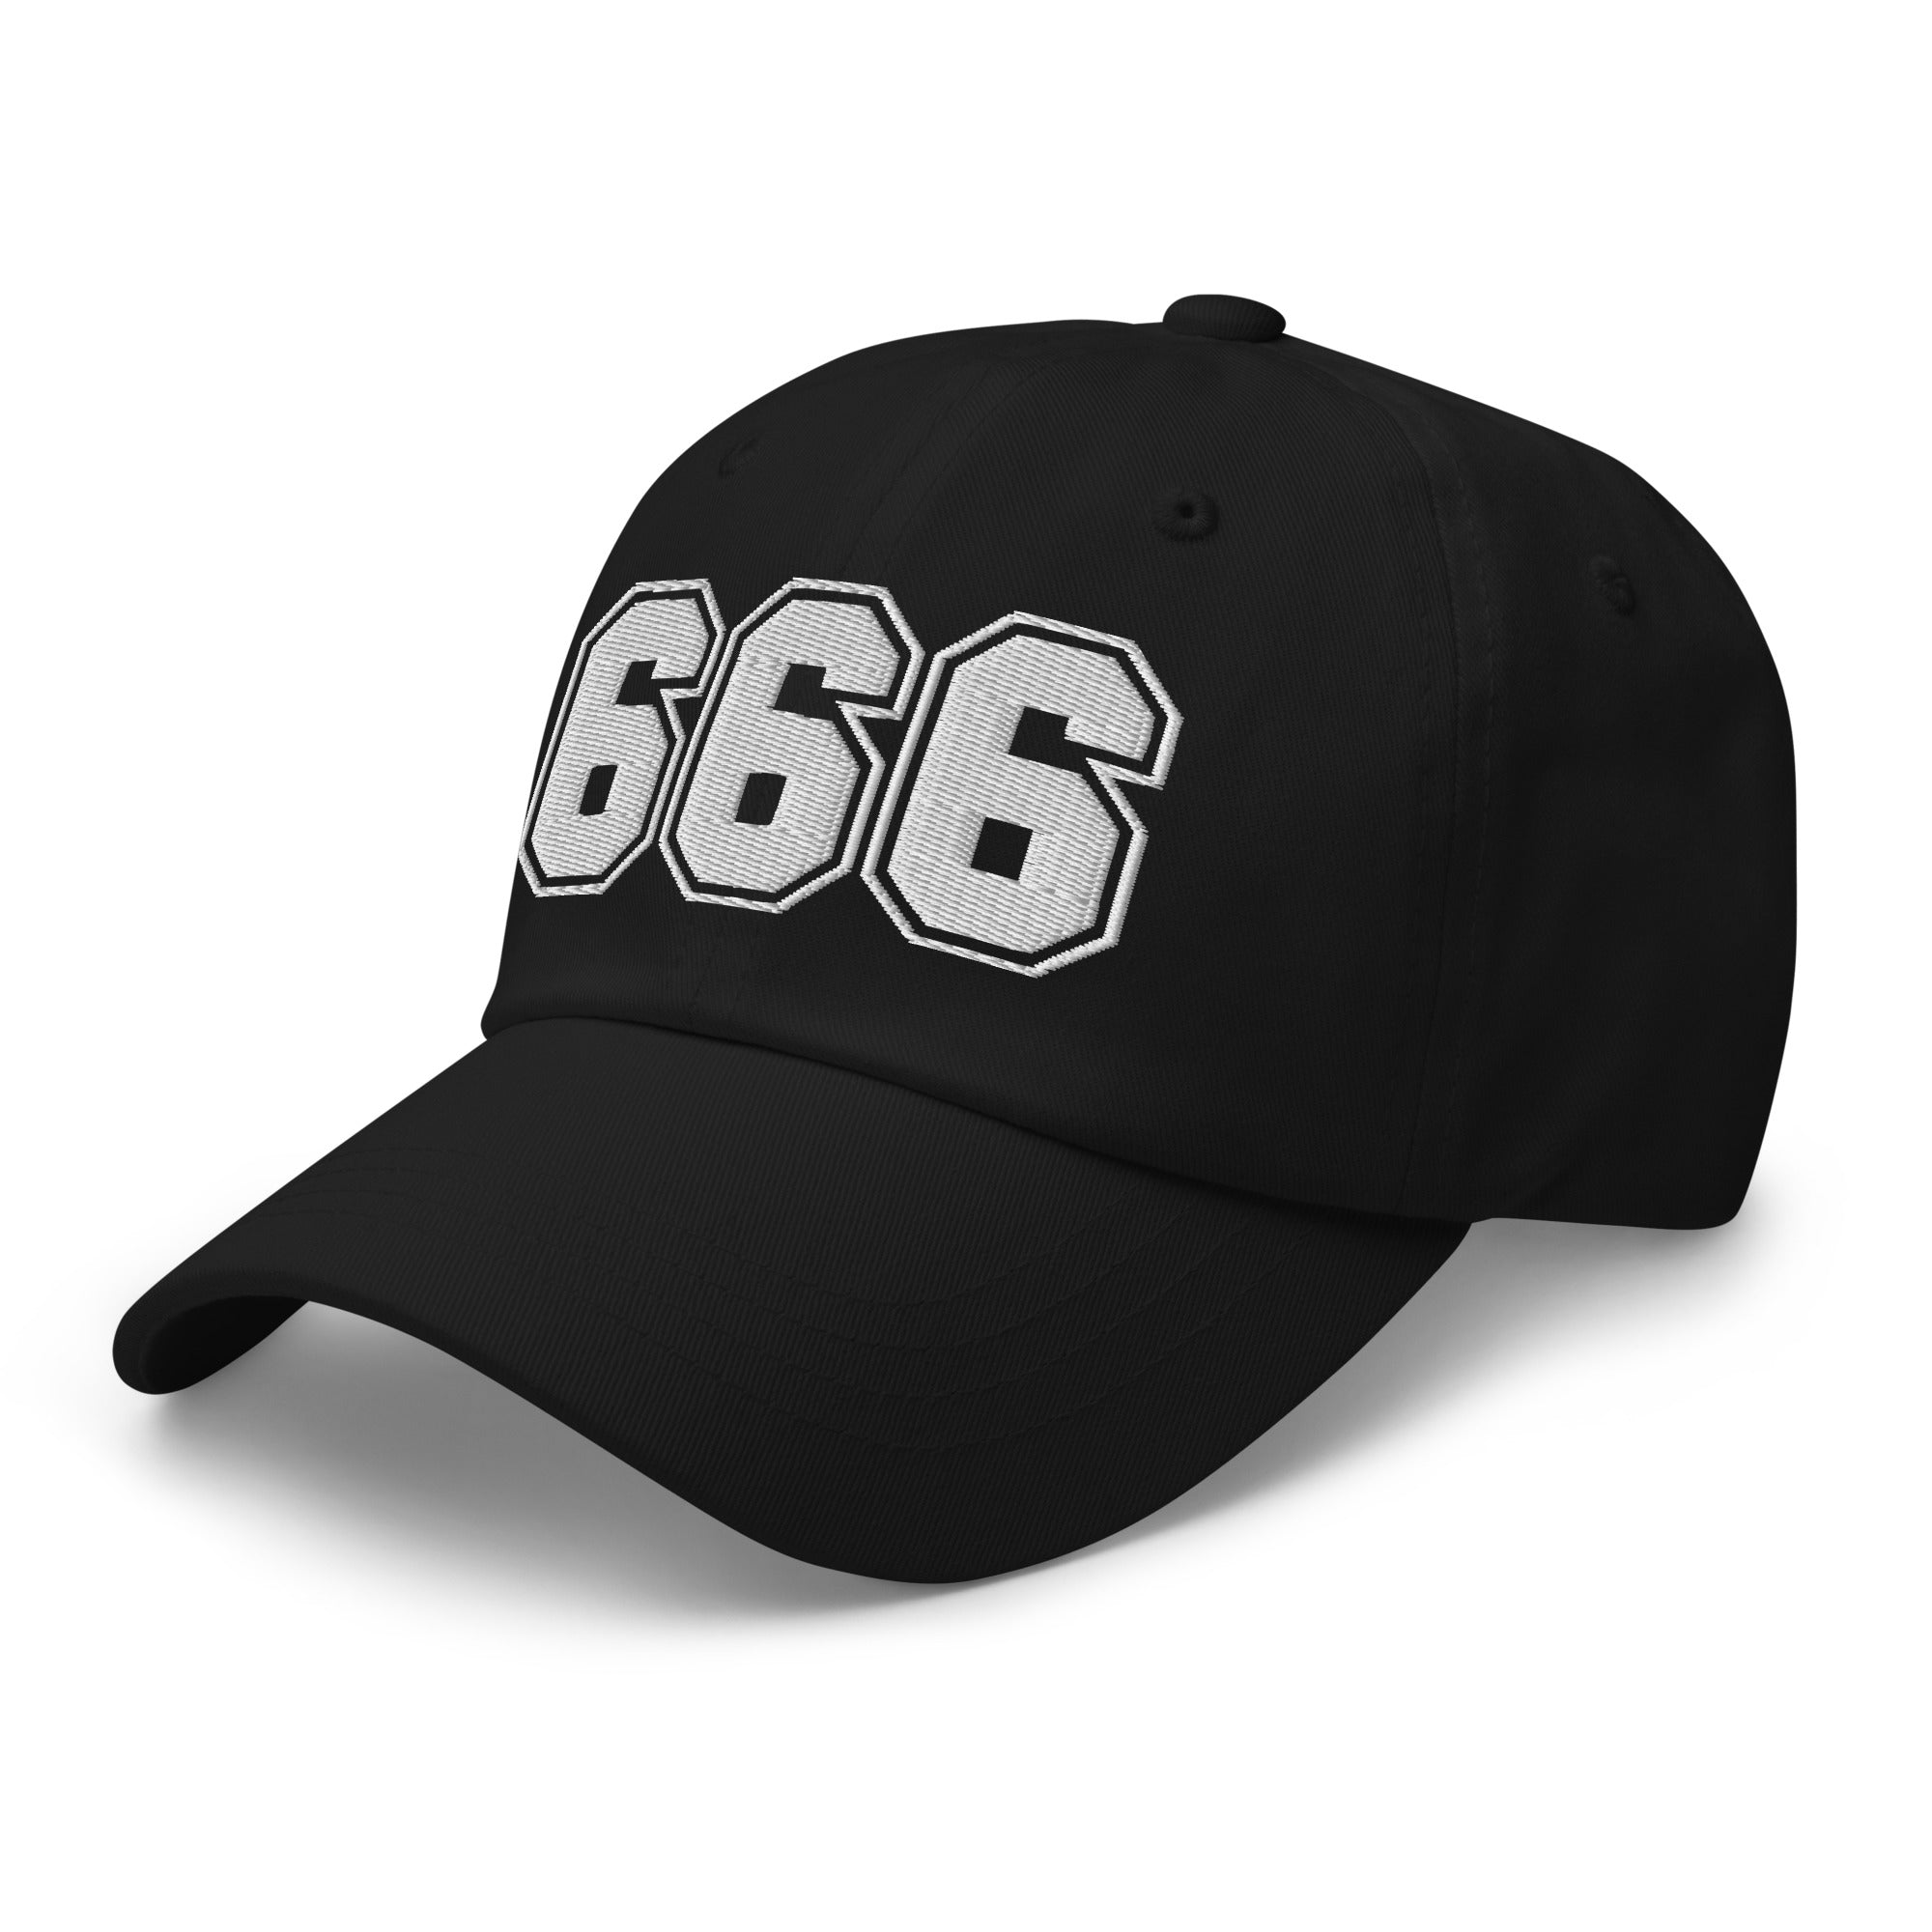 666 The Number of the Beast Evil Embroidered Baseball Cap Dad hat White Thread - Edge of Life Designs